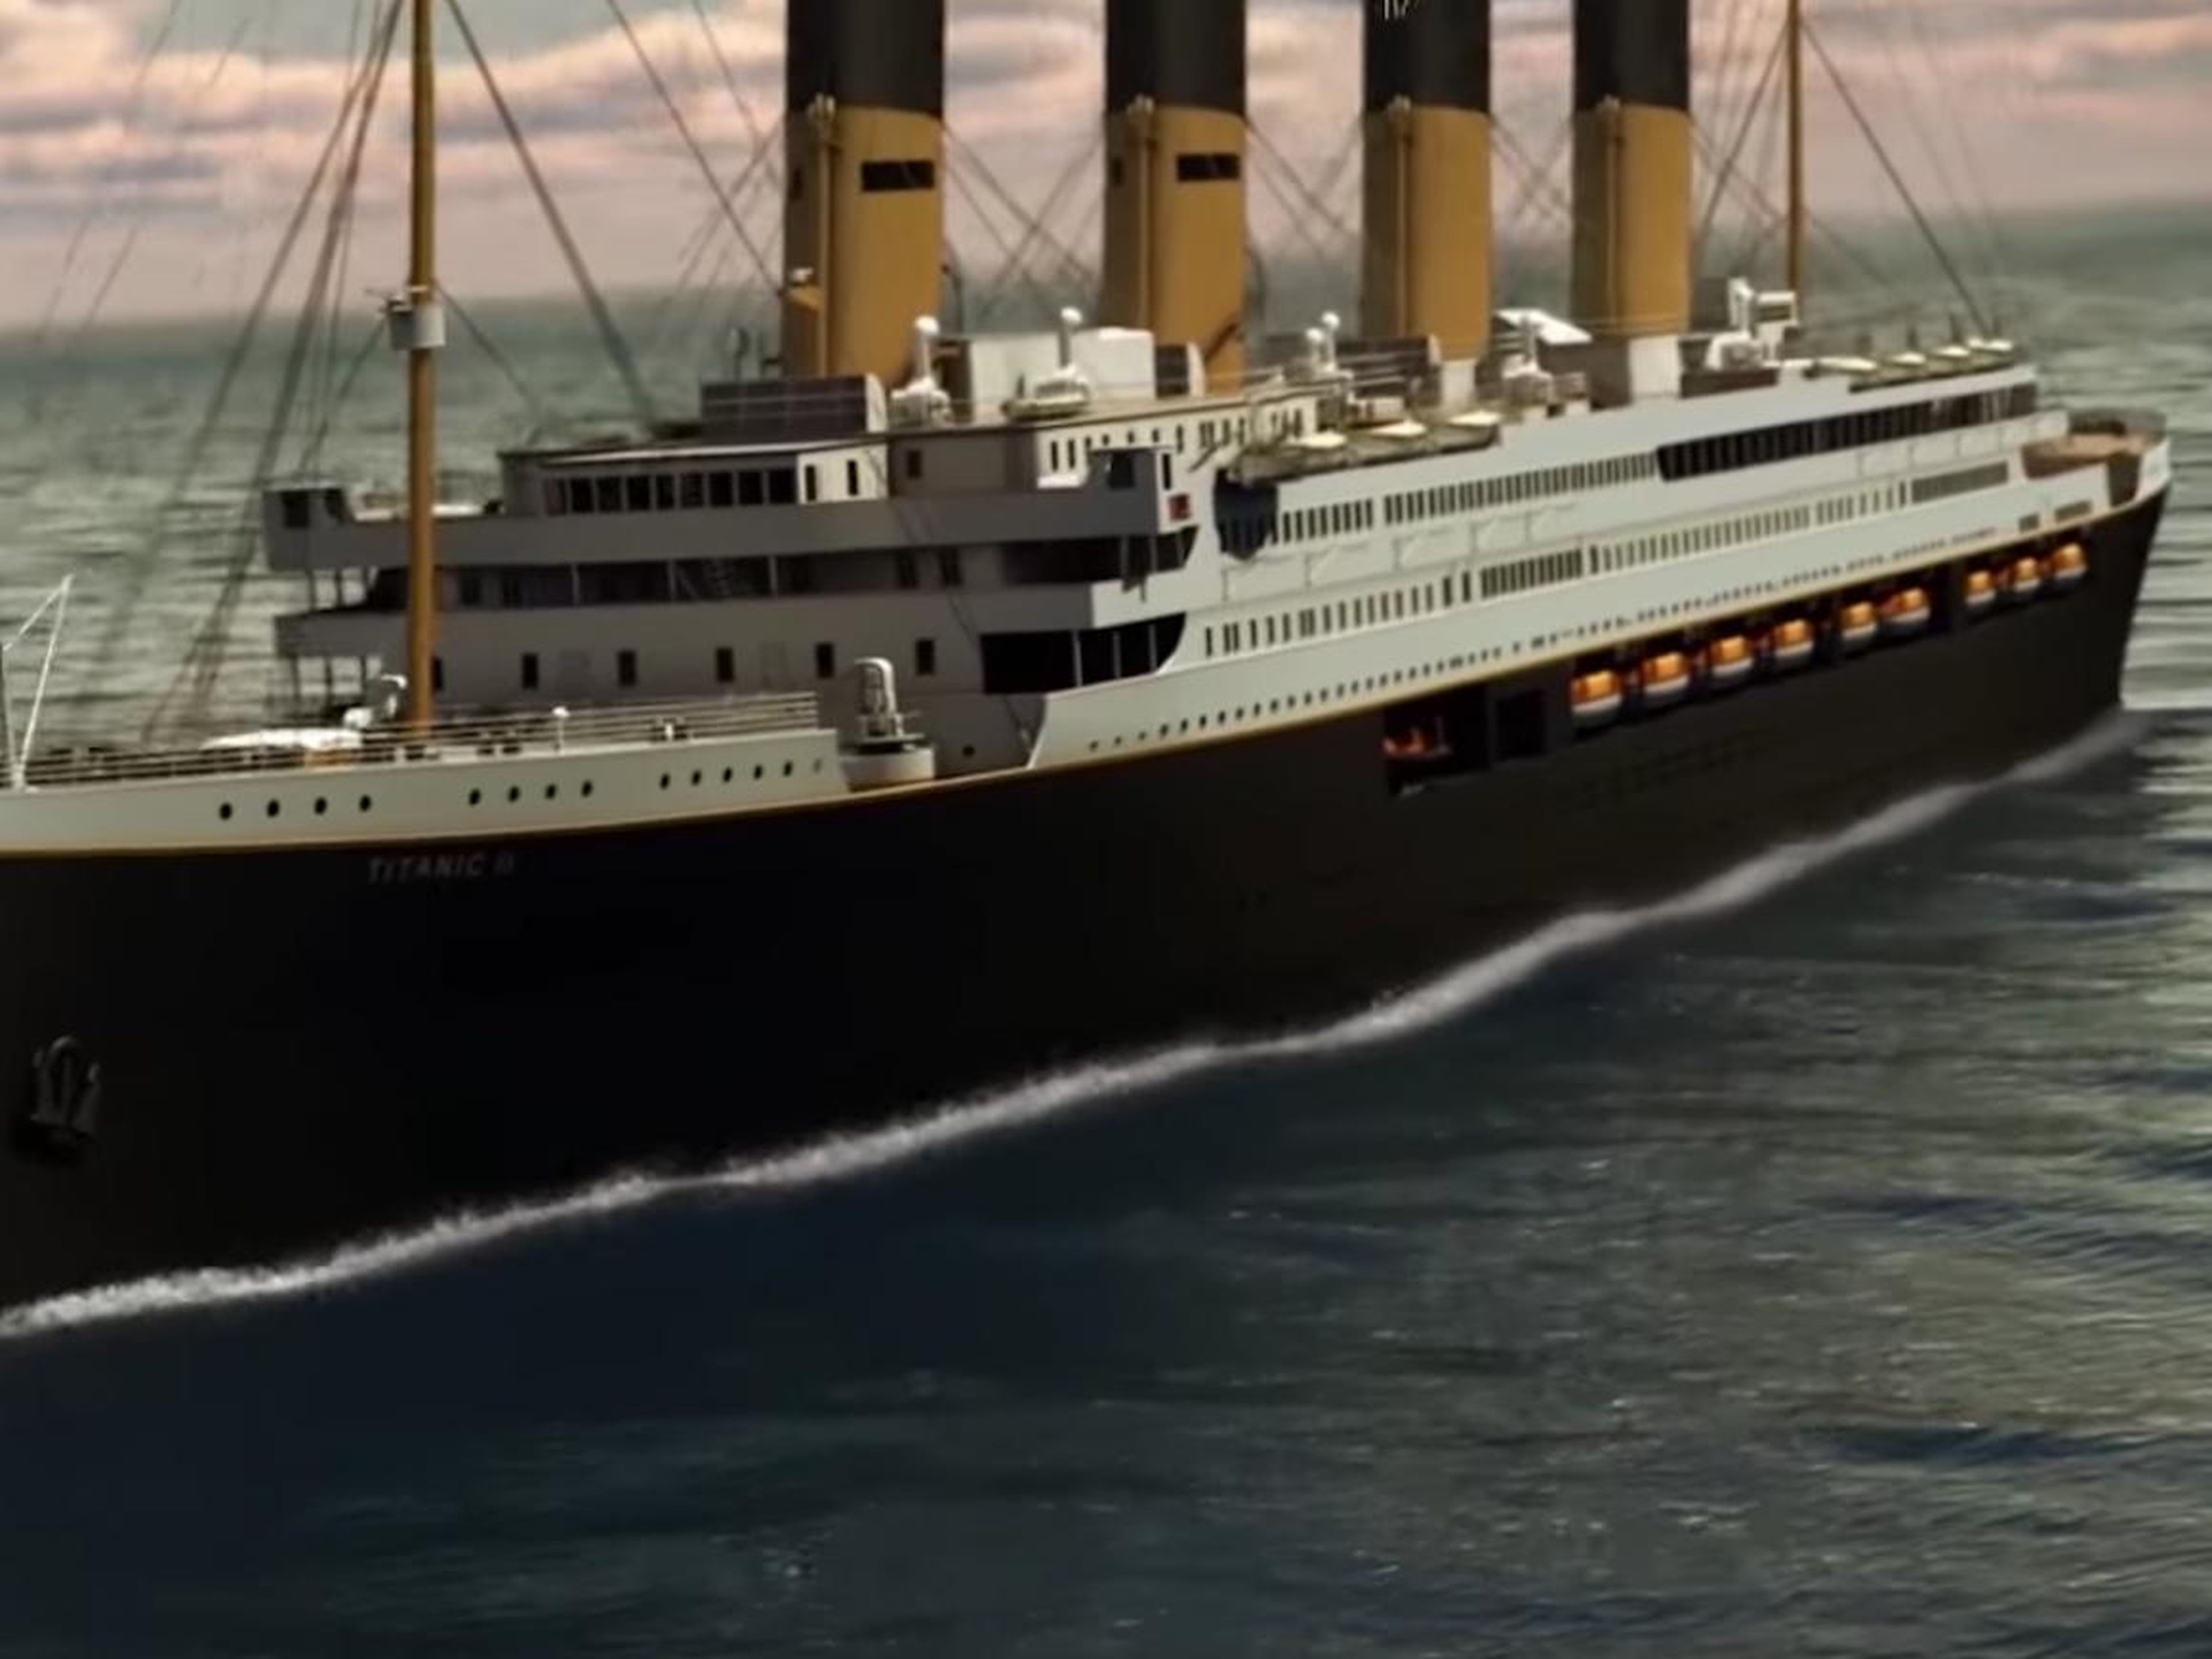 The Titanic ll will have a new safety deck to hold the appropriate number of lifeboats.